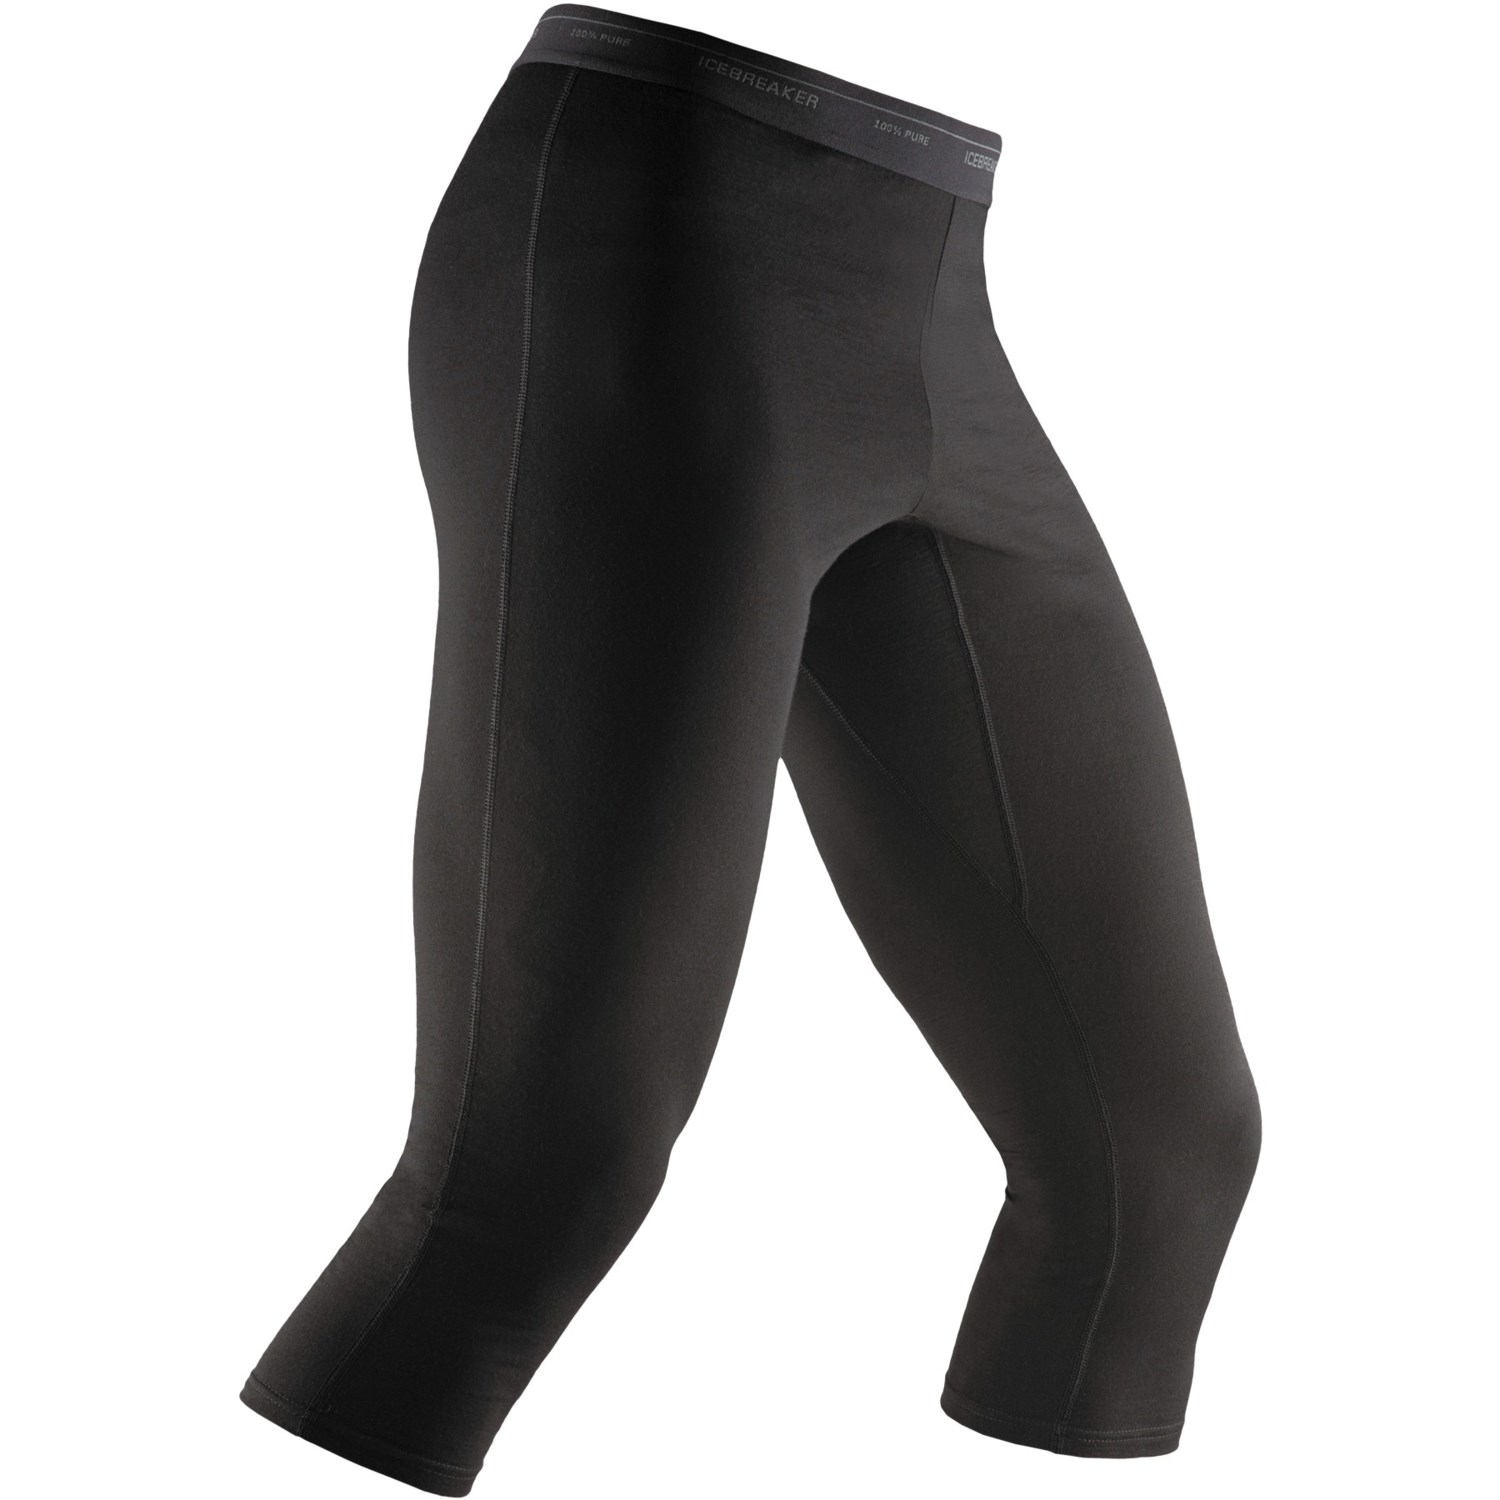 Icebreaker Bodyfit 200 Base Layer Tights (For Men) 4743A - Save 35%